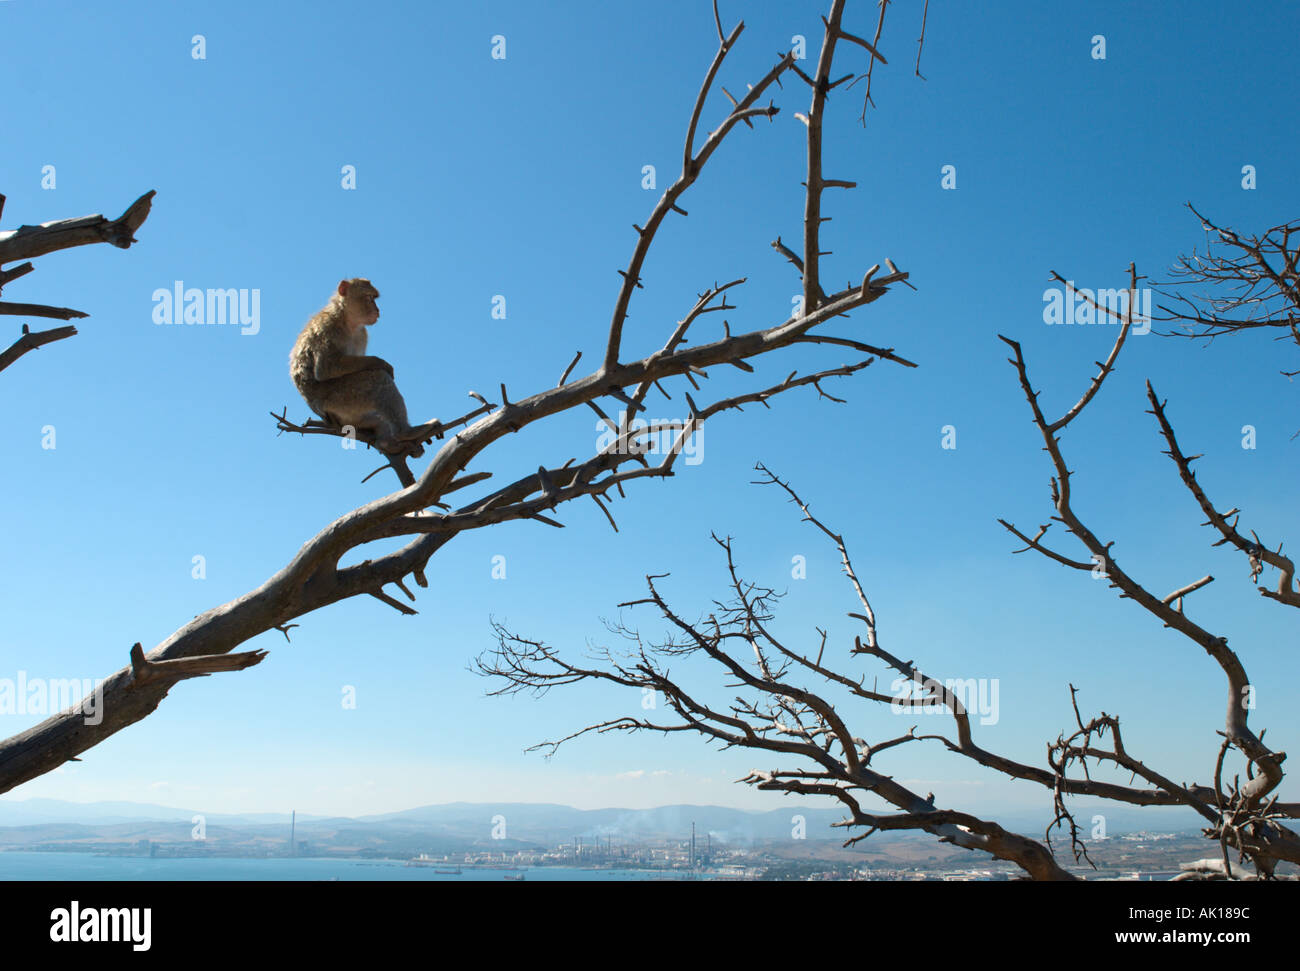 Barbary Ape (Macaca sylvanus) sitting in a tree with a view over to La Linea, Upper Rock, Gibraltar, Spain Stock Photo